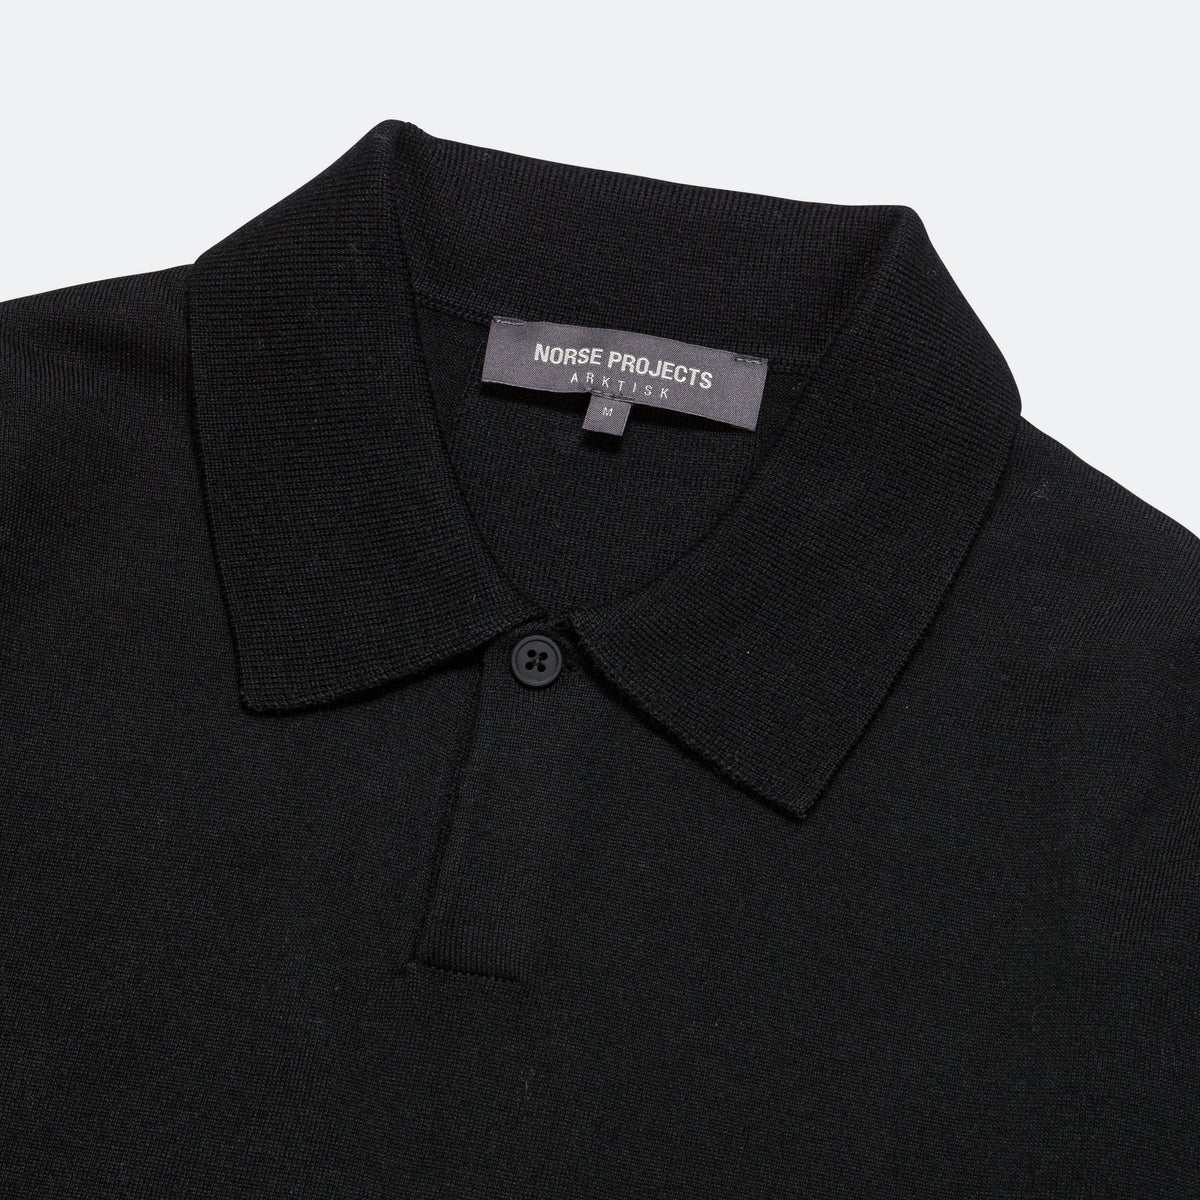 Norse ARKTISK Tech Merino Polo - Black | Up There | UP THERE